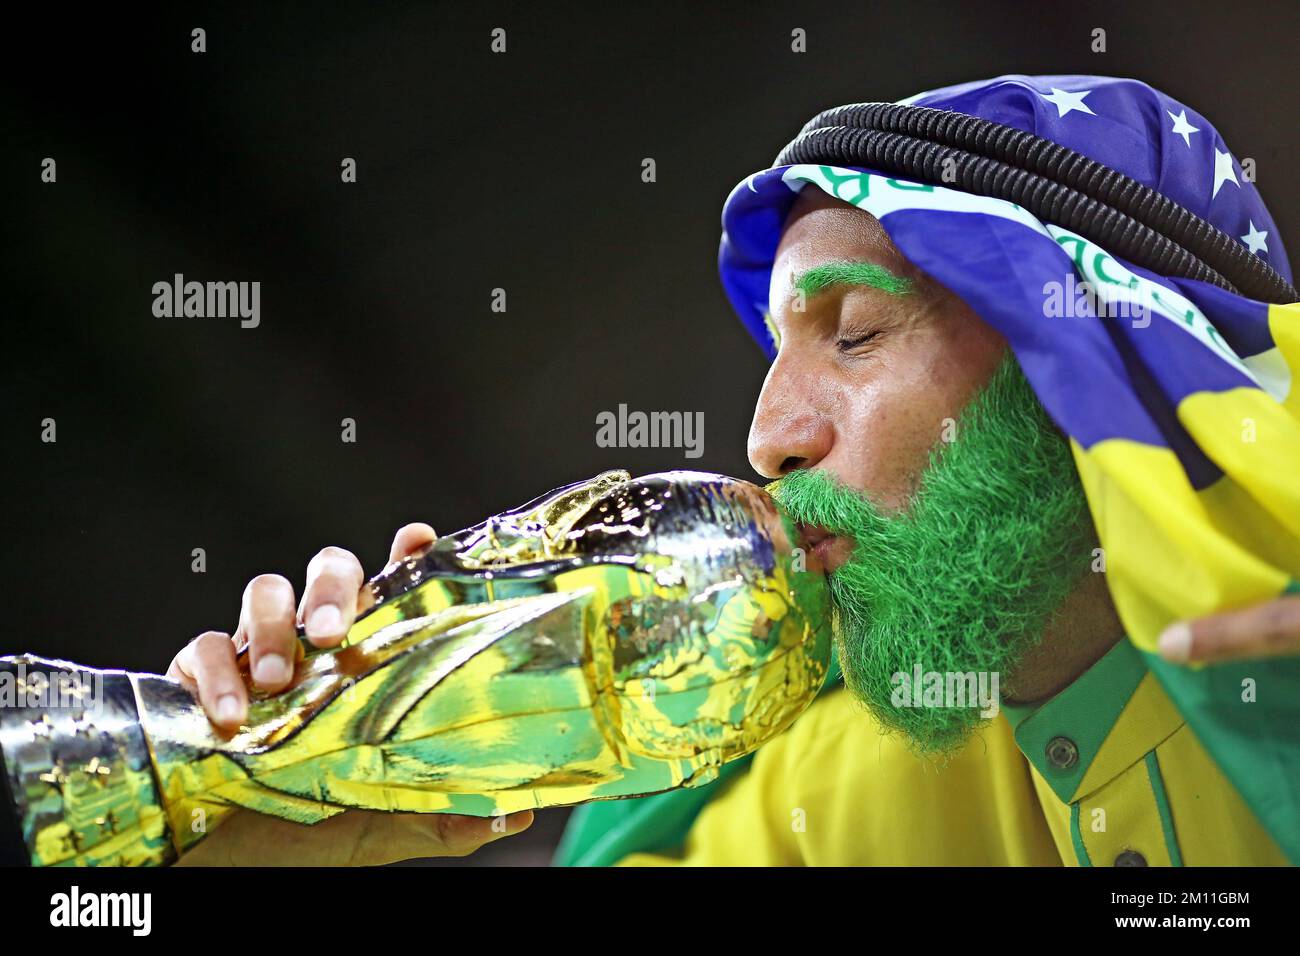 Brazil fan kisses the World Cup trophy during the FIFA World Cup Qatar 2022 match, Quarter Final, between Croatia v Brazil played at Education City Stadium on Dec 9, 2022 in Doha, Qatar. (Photo by Heuler Andrey / DiaEsportivo / PRESSIN) Stock Photo